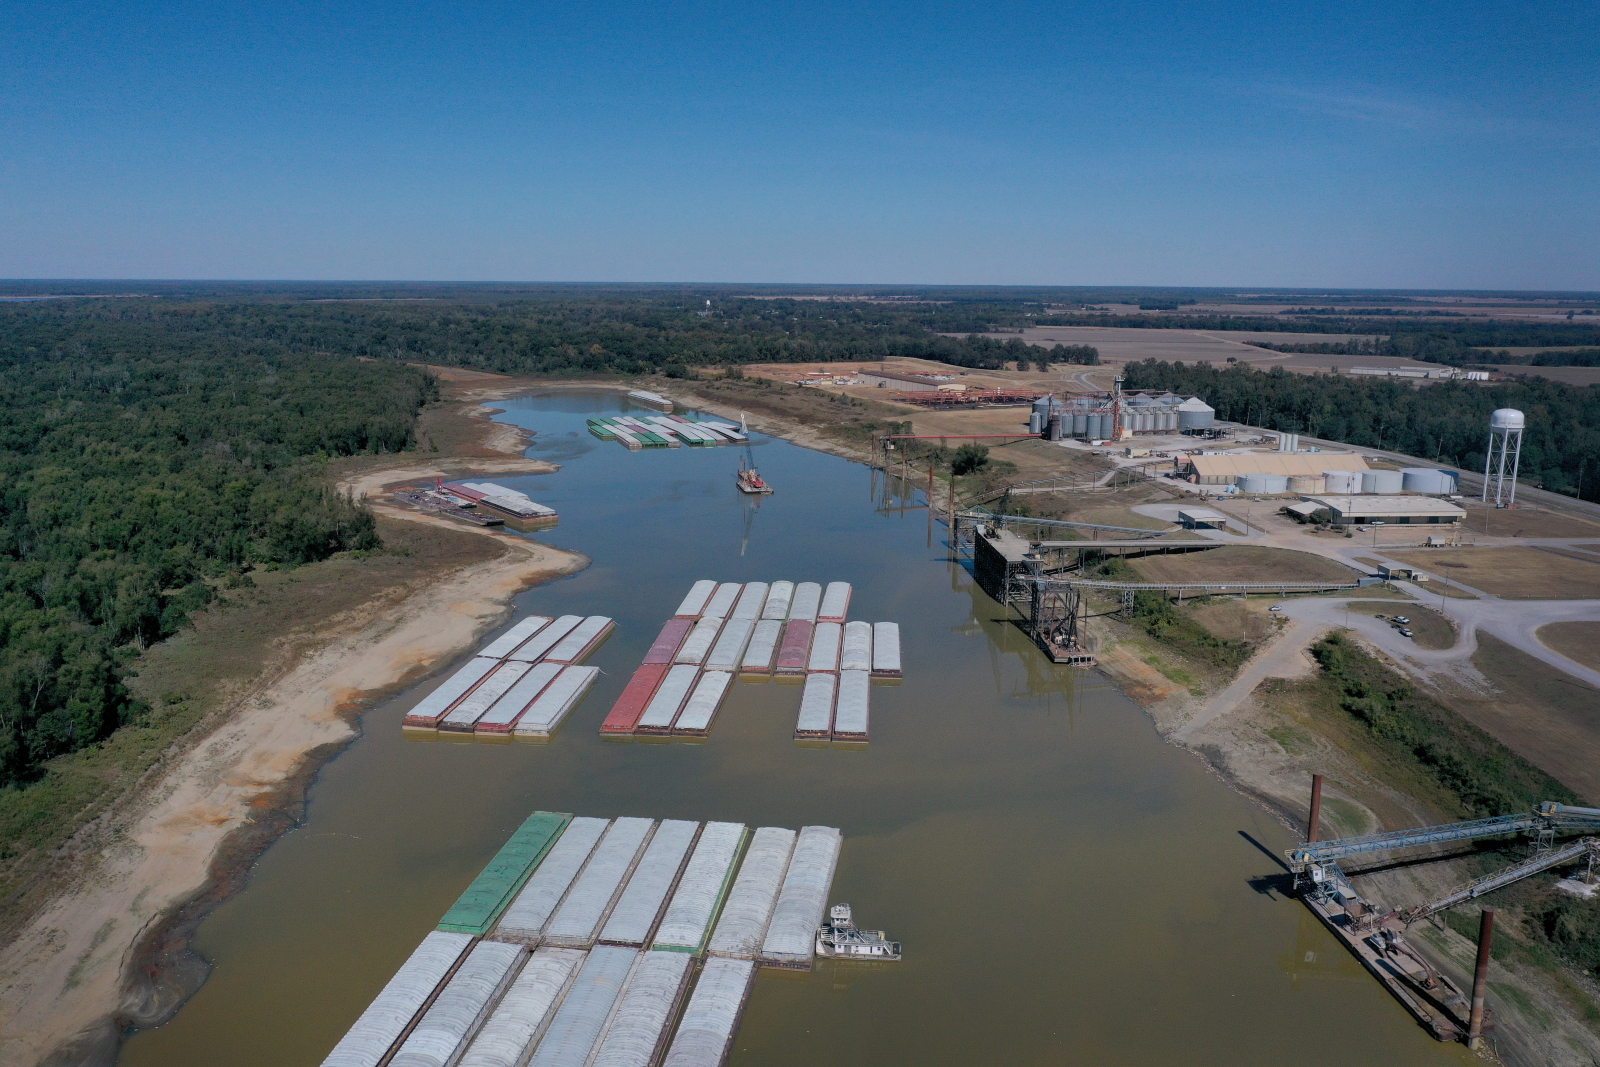 An aerial image shows various container ships sit in the Mississippi River, to the left is green vegetation and to the right is farm equipment